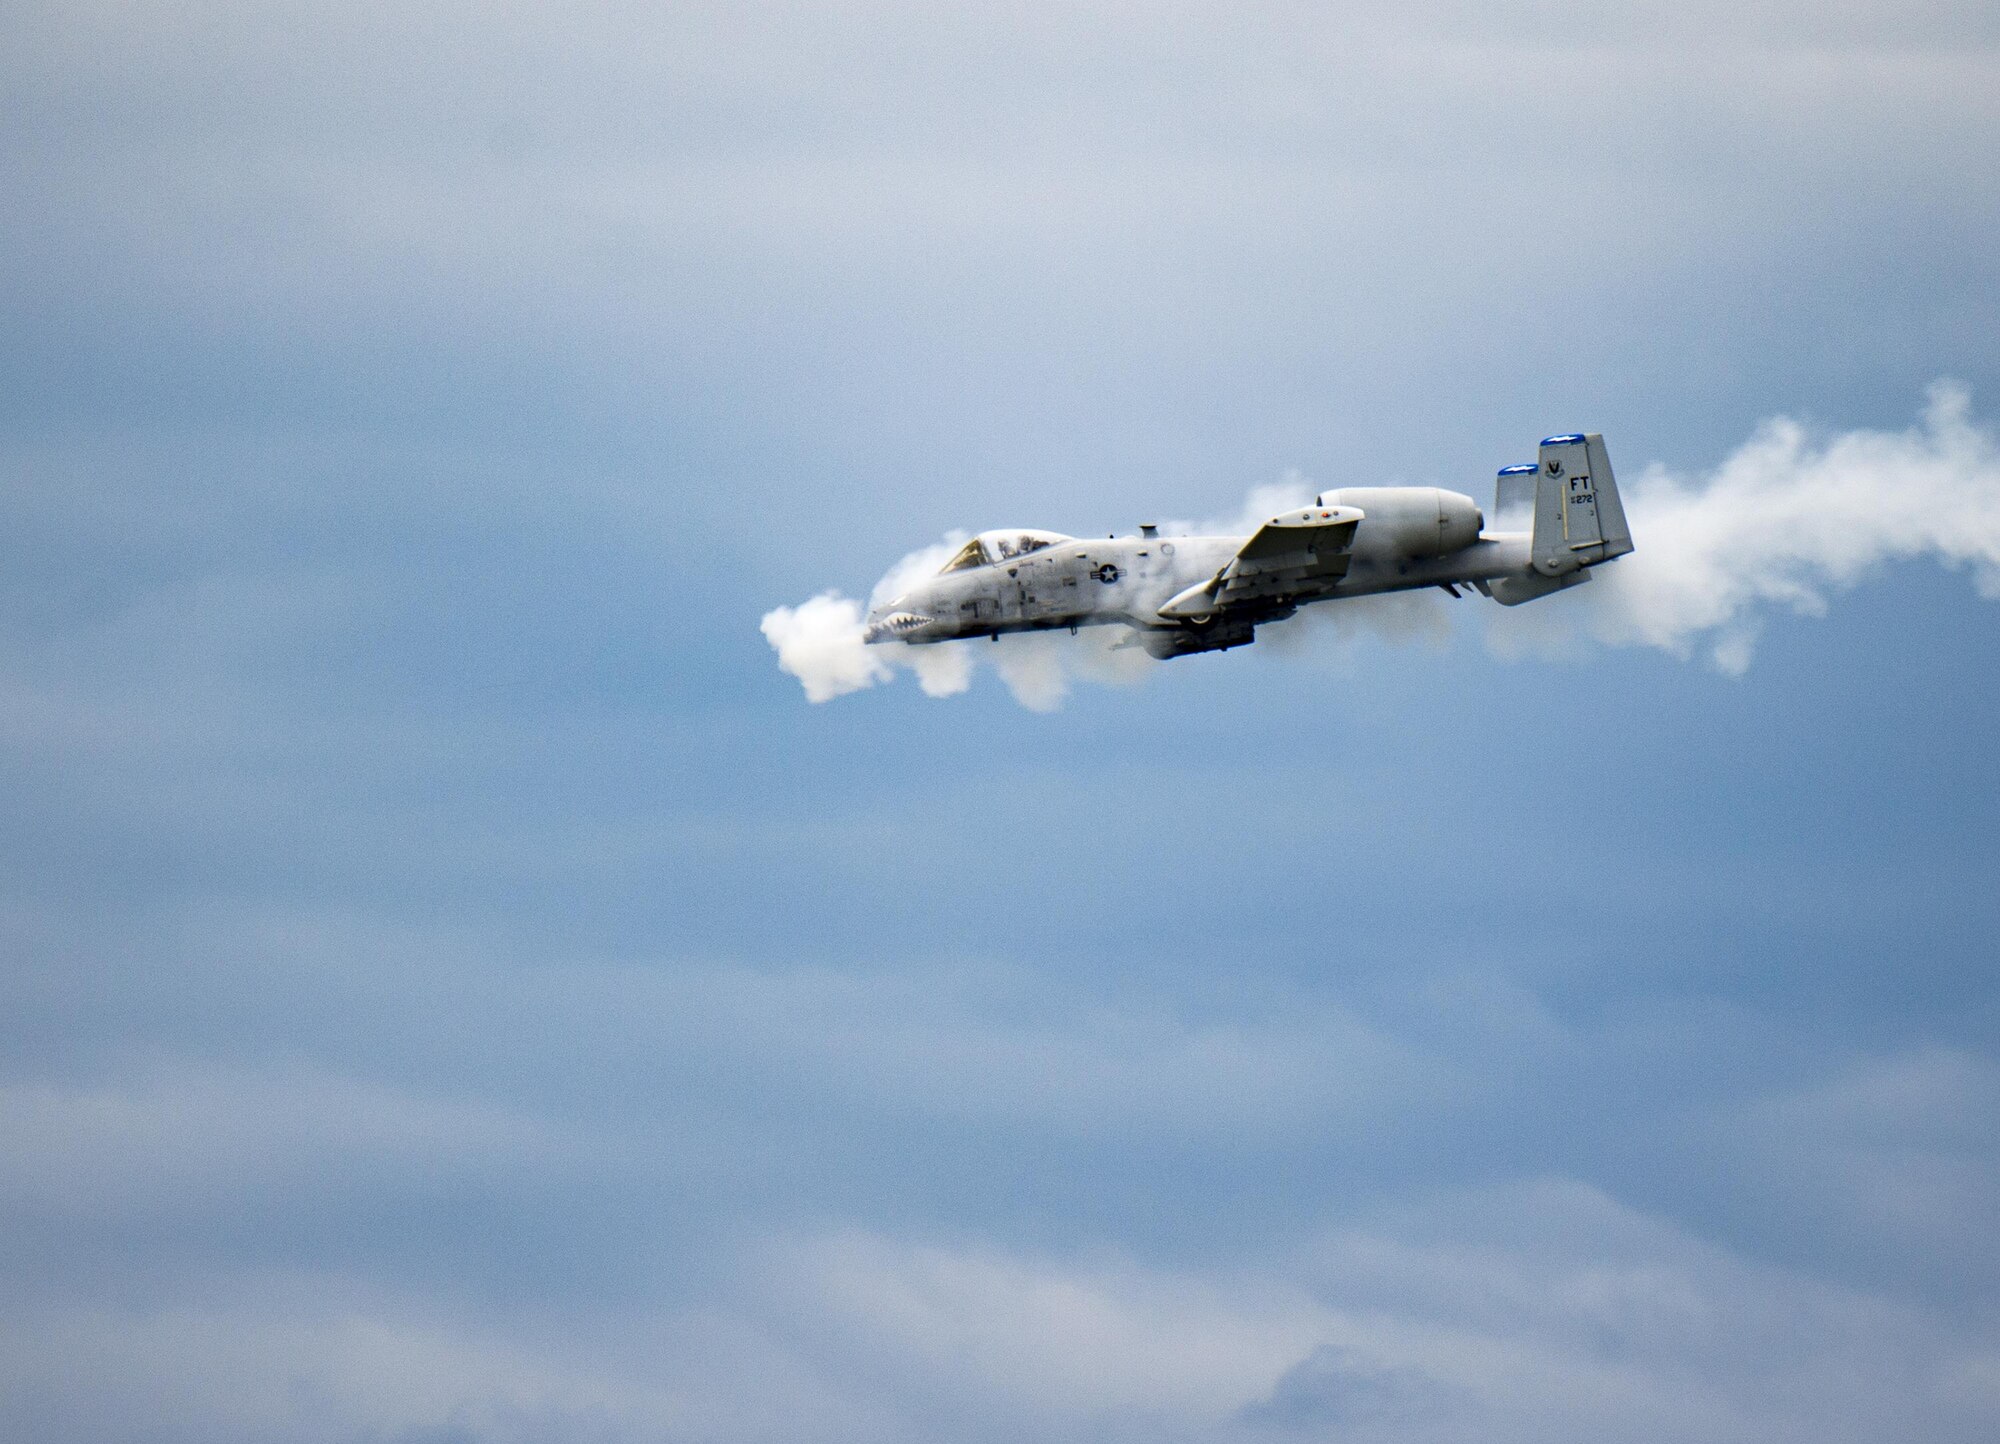 An A-10 Thunderbolt II fires the GAU-8 Avenger, a 30mm Gatling-style canon, over the Grand Bay Bombing and Gunnery Range at Moody Air Force Base, Ga., May 20, 2016. A-10s are used when calls for close air support with the capability to fire rockets, drop bombs or suppress the enemy with the 30mm cannon mounted on the nose of the aircraft. (U.S. Air Force photo by Tech. Sgt. Zachary Wolf/Released)